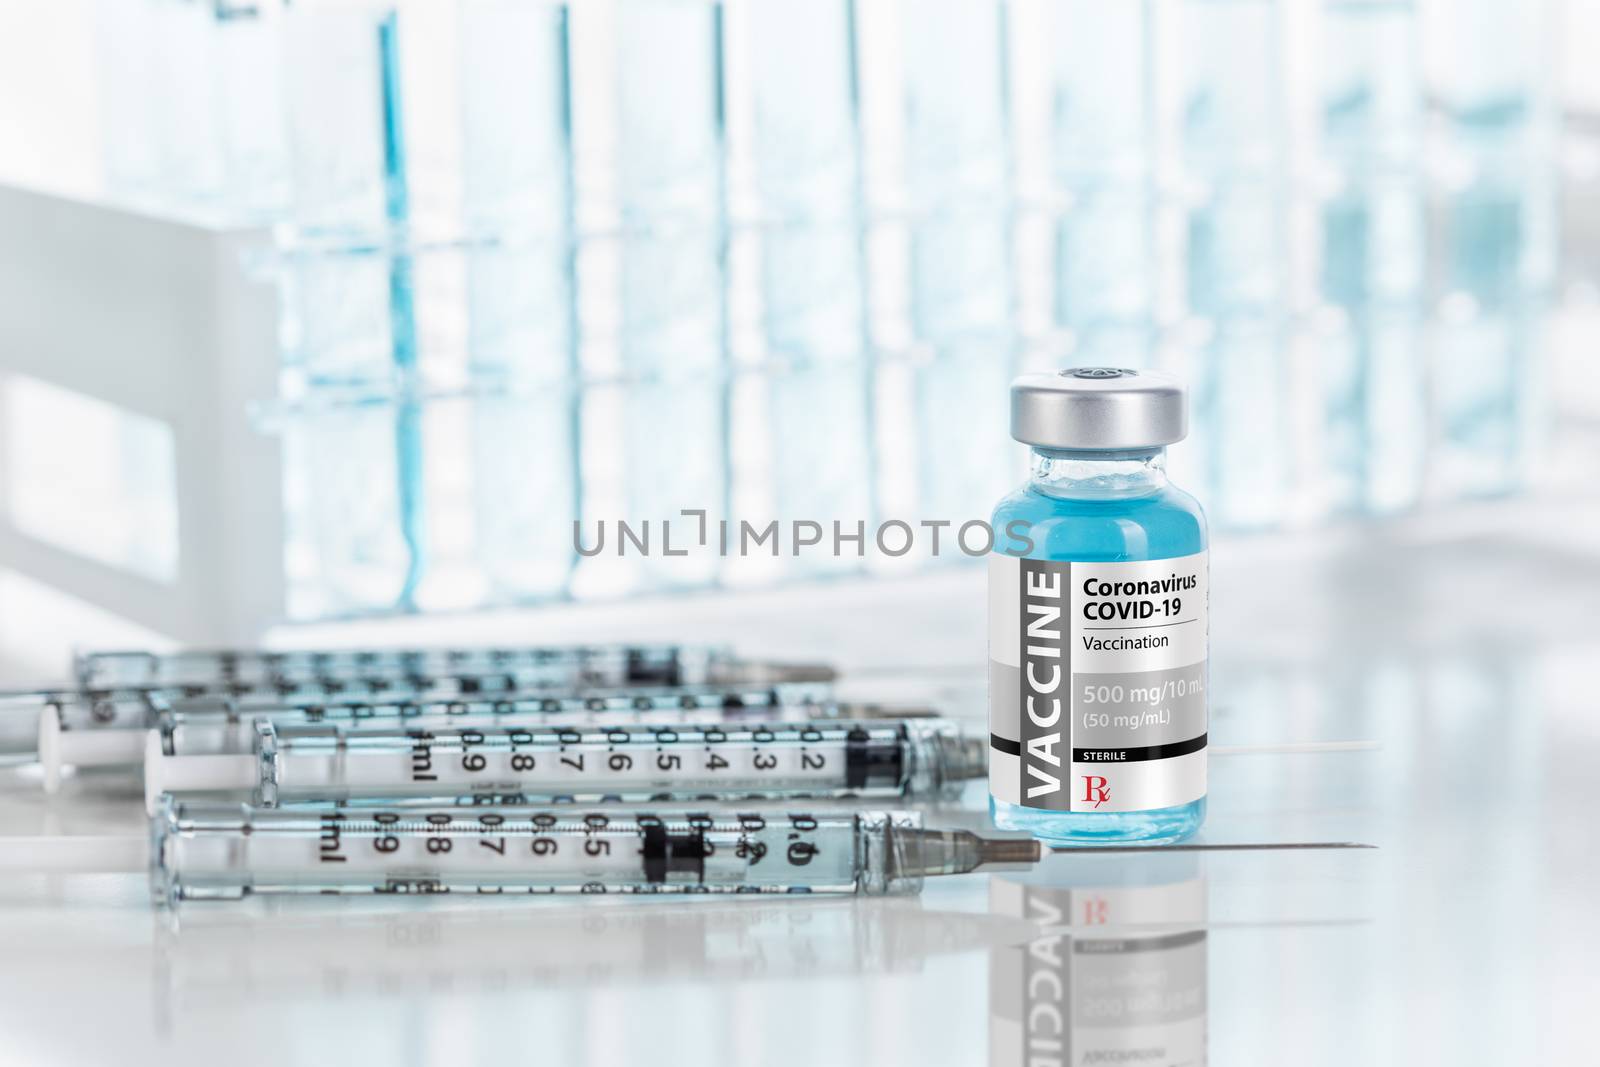 Coronavirus COVID-19 Vaccine Vial and Several Syringes On Reflective Surface Near Test Tubes.